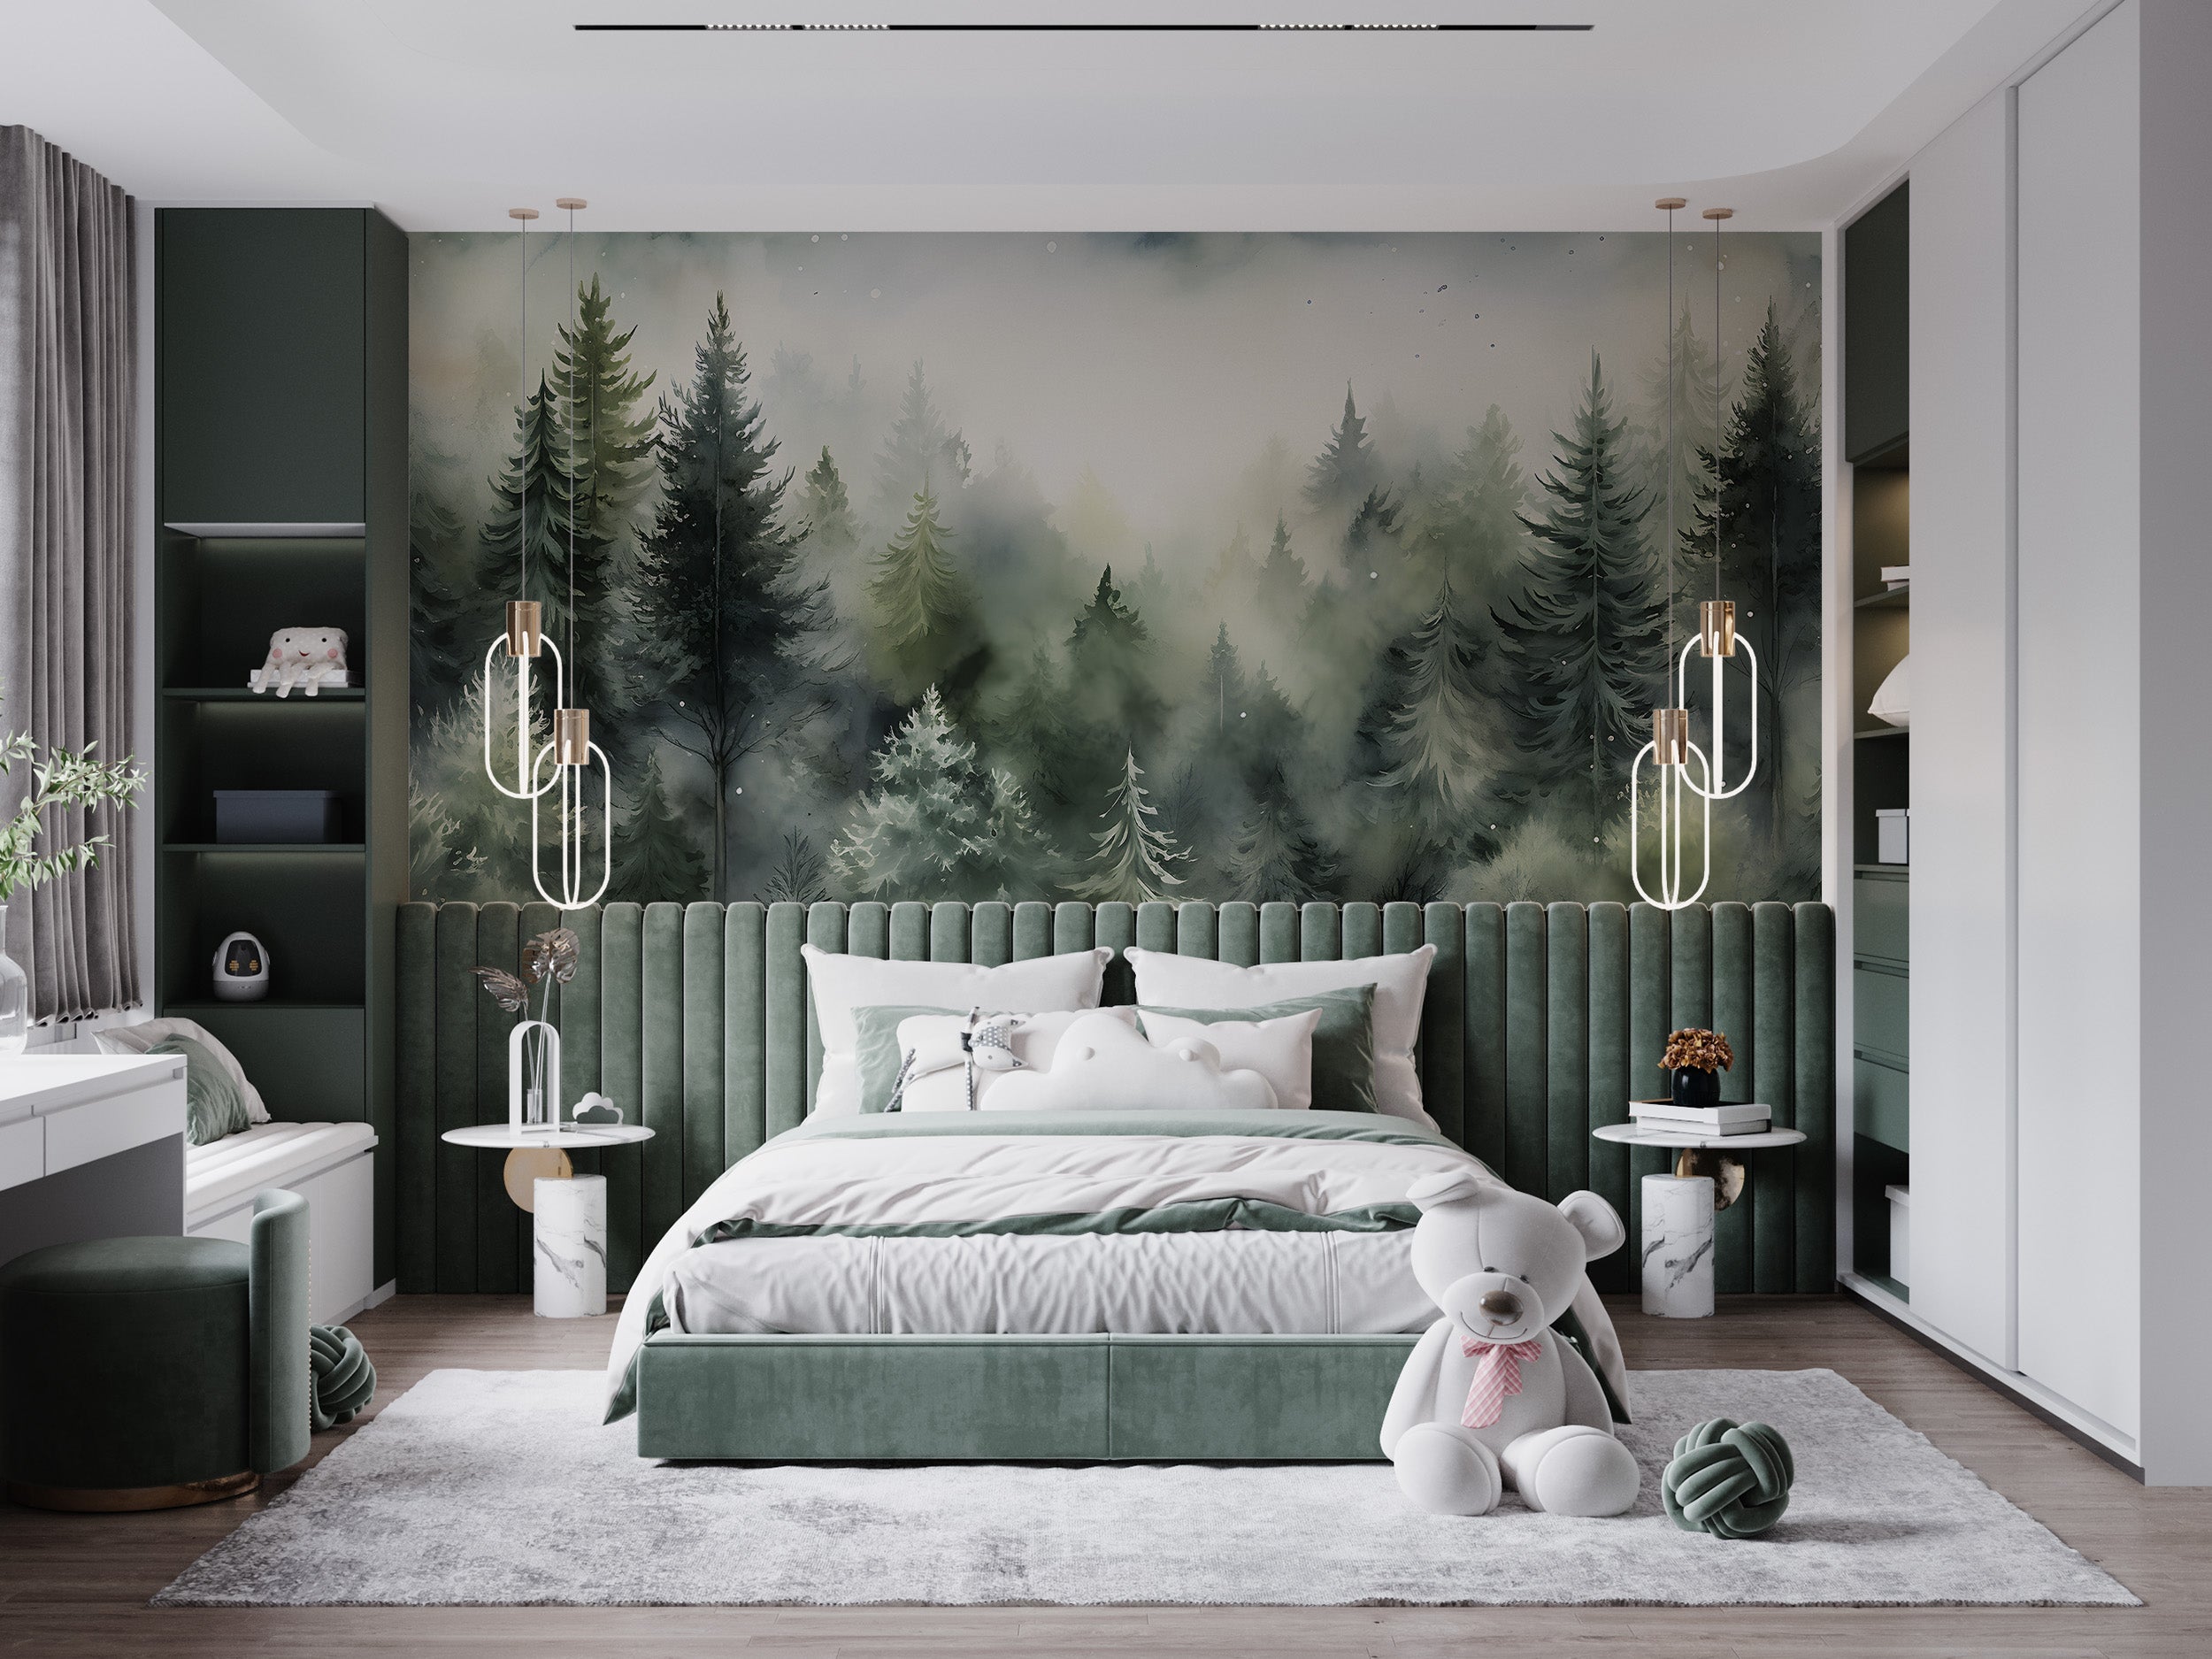 Transform Your Room with Misty Forest Wall Art